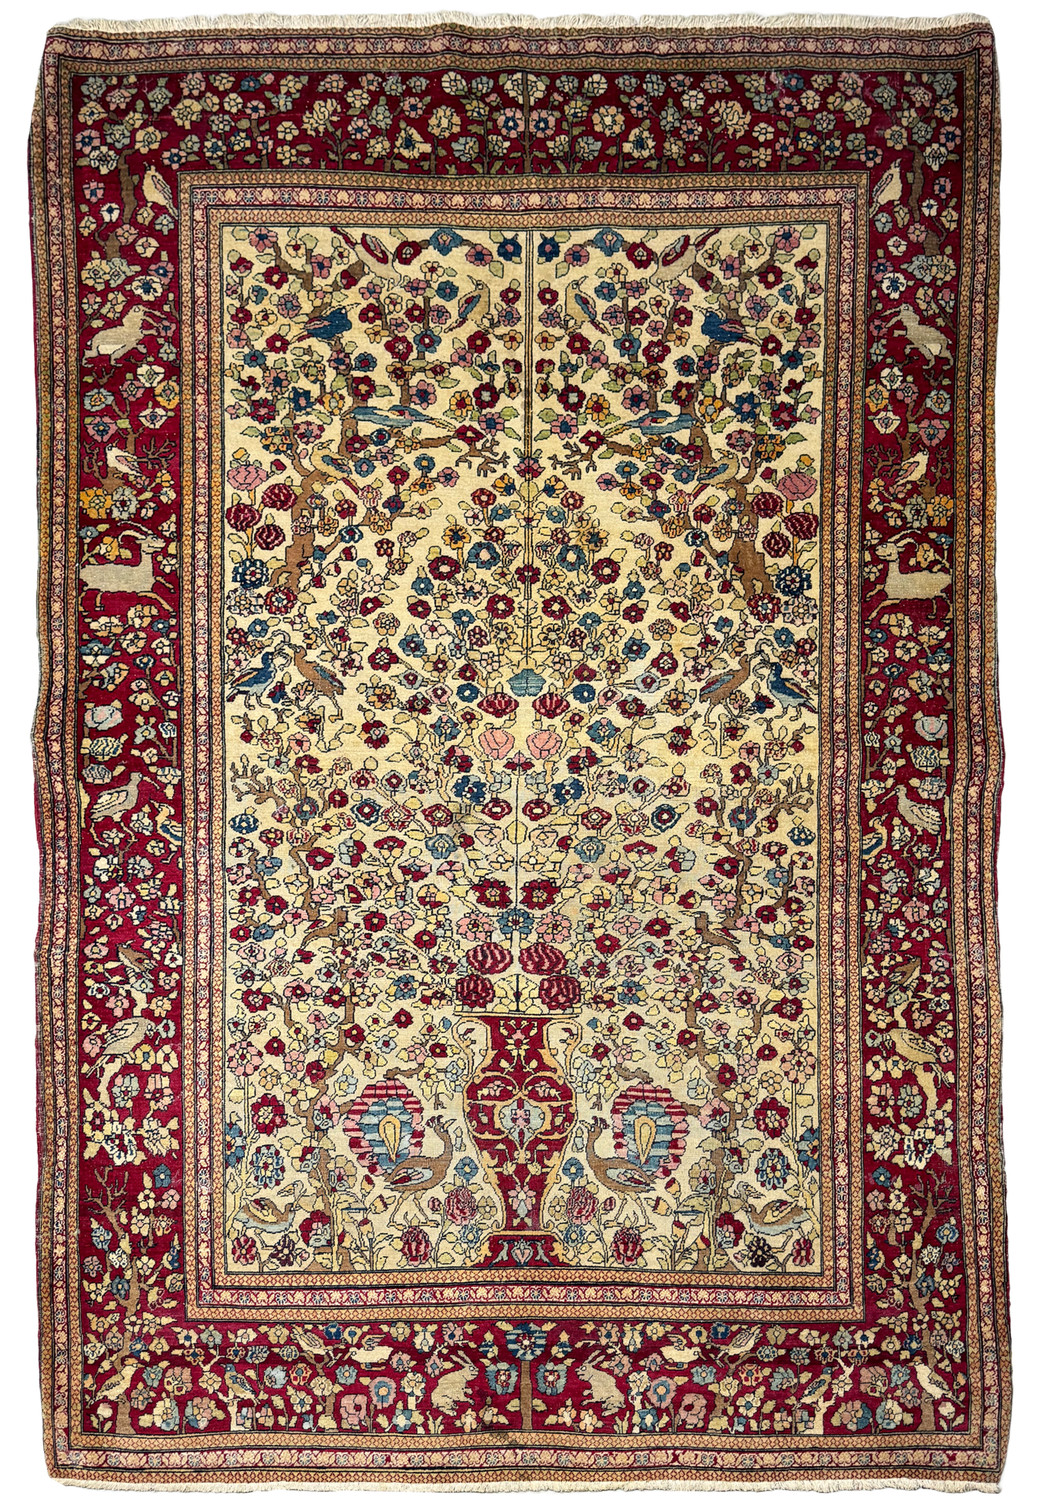 An intricate Antique Persian Farahan rug displayed in full view, showcasing its rich burgundy borders and a diverse floral pattern against an ivory background.